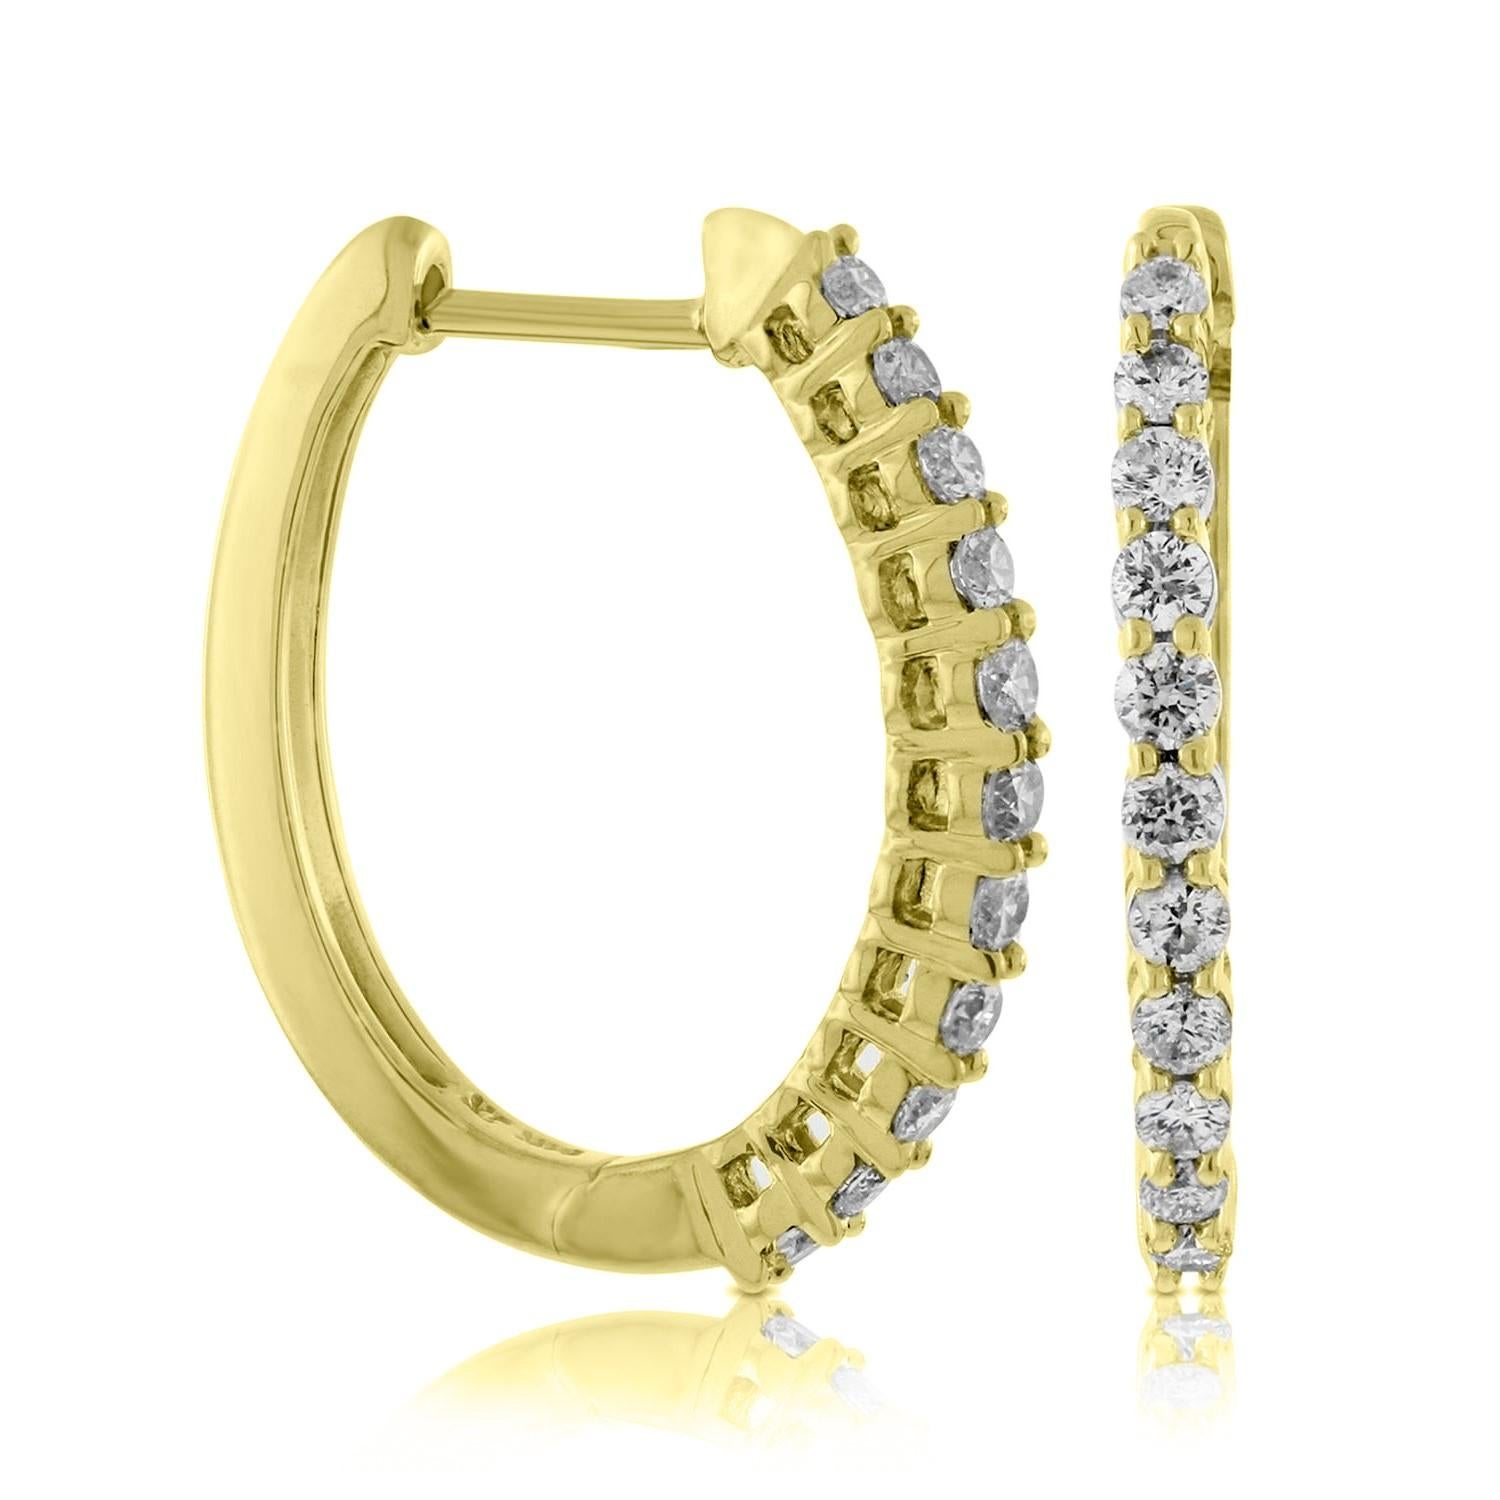 Nothing says luxury like an incredible pair of diamond round hoop earrings. These stunning brightly polished 14 karat yellow gold round-shaped hoop earrings feature a total of 24 round brilliant cut diamonds totaling .50 carats are prong set on the